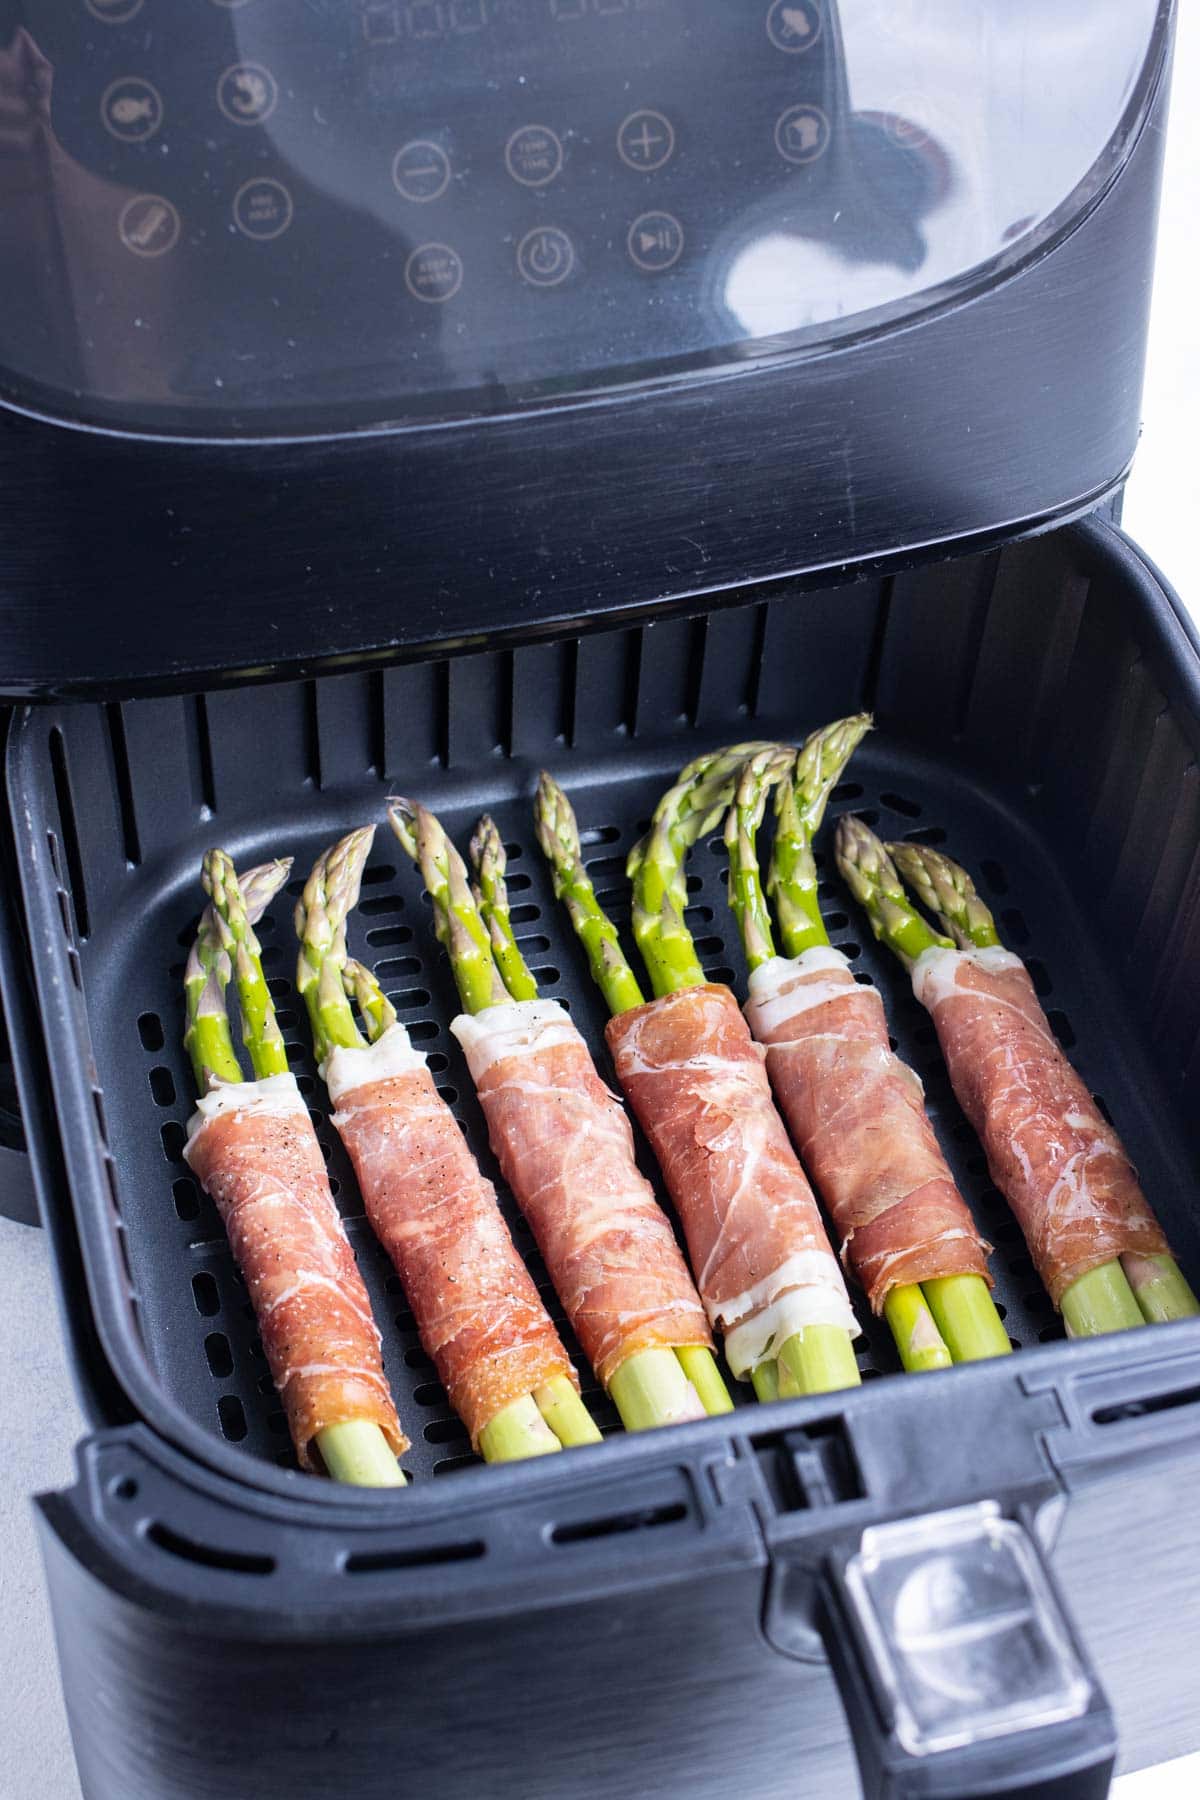 Prosciutto asparagus is cooked in an air fryer.